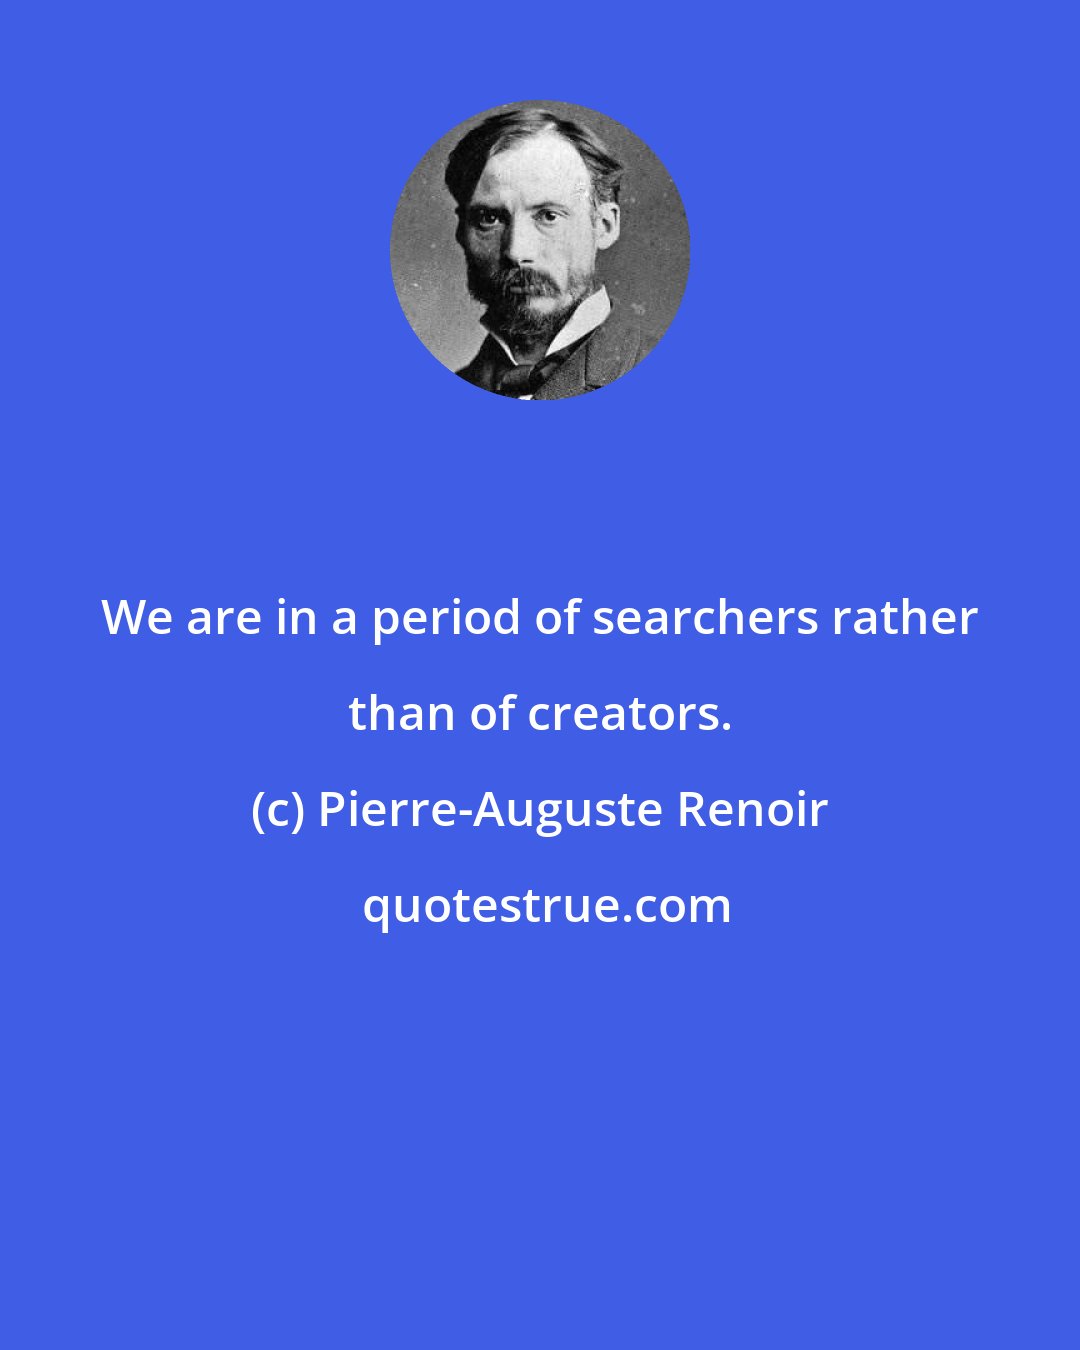 Pierre-Auguste Renoir: We are in a period of searchers rather than of creators.